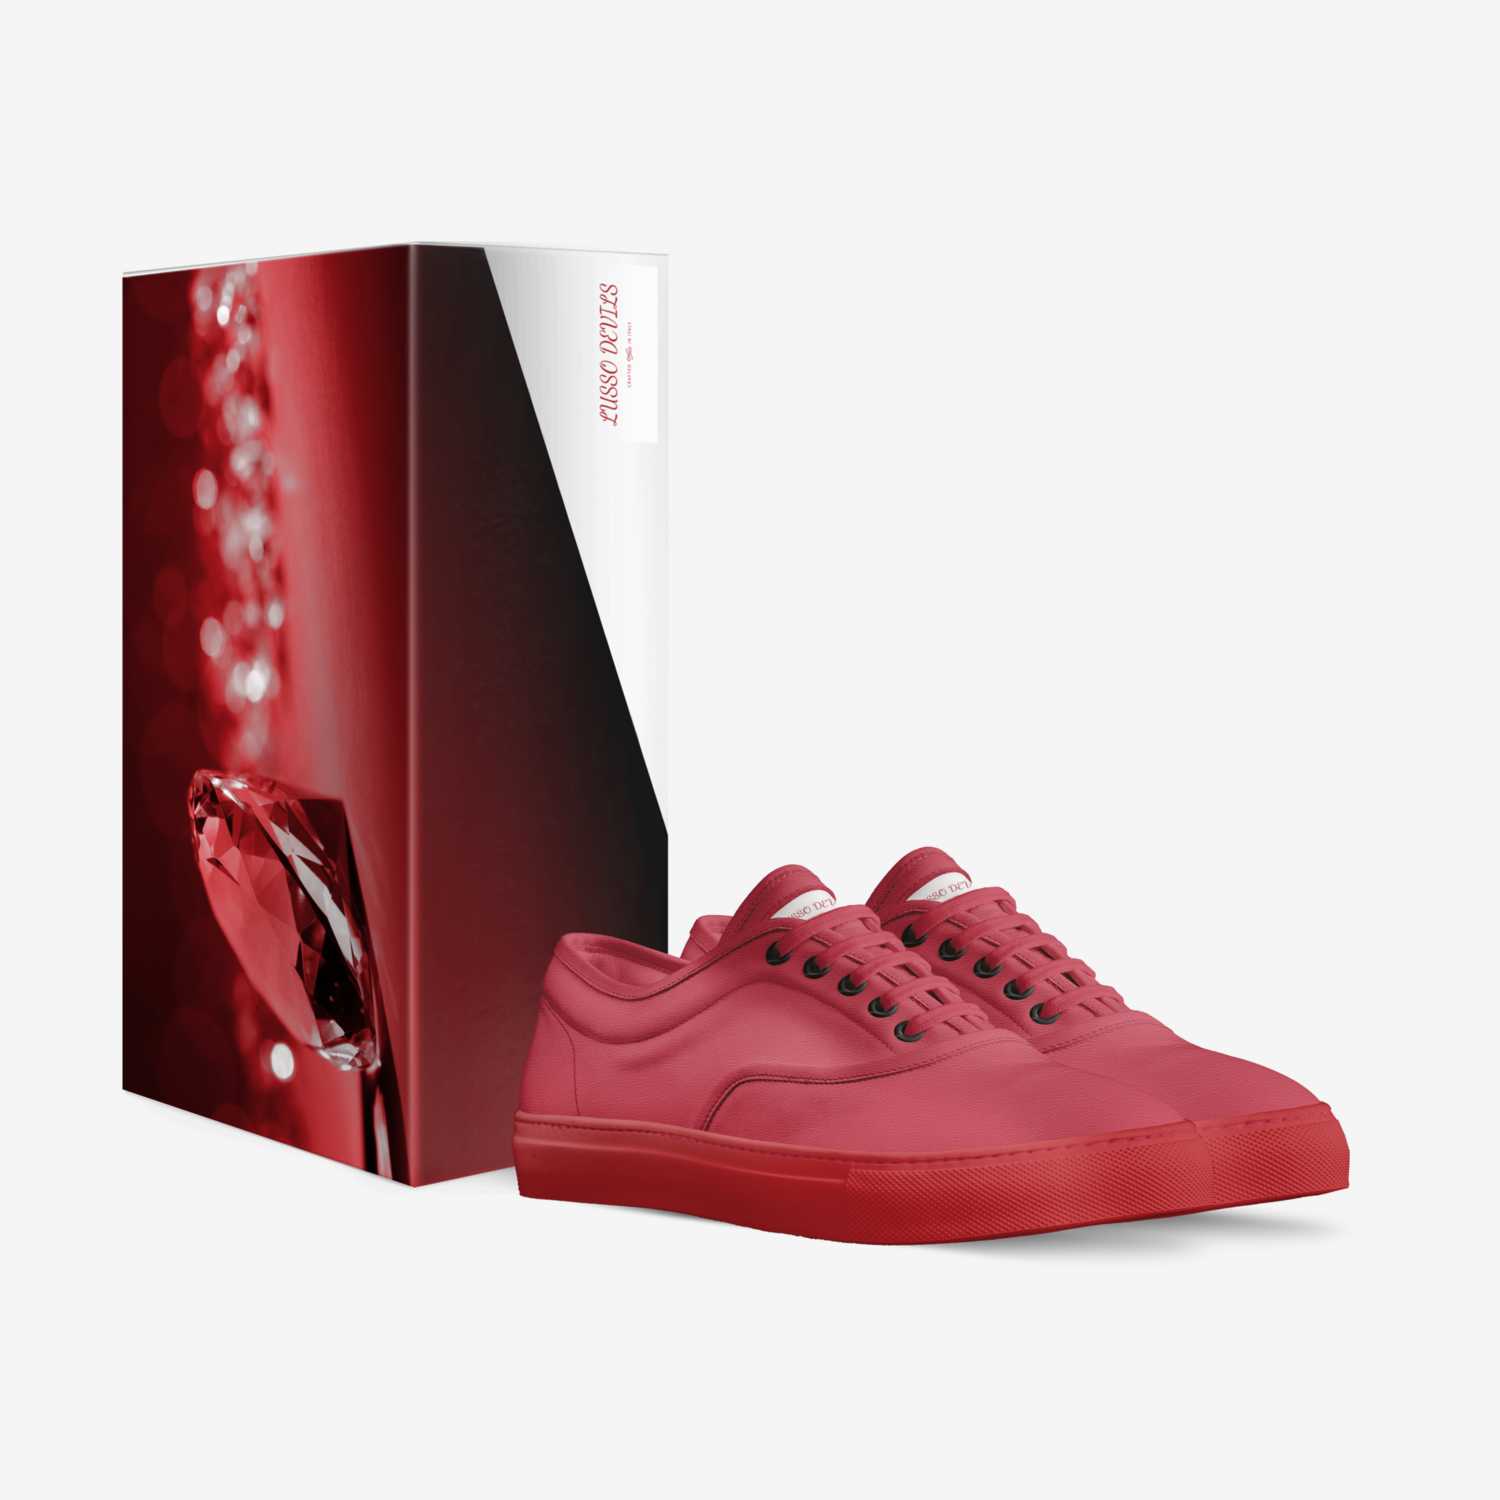 LUSSO DEVILS custom made in Italy shoes by Naseeb Ellahi | Box view